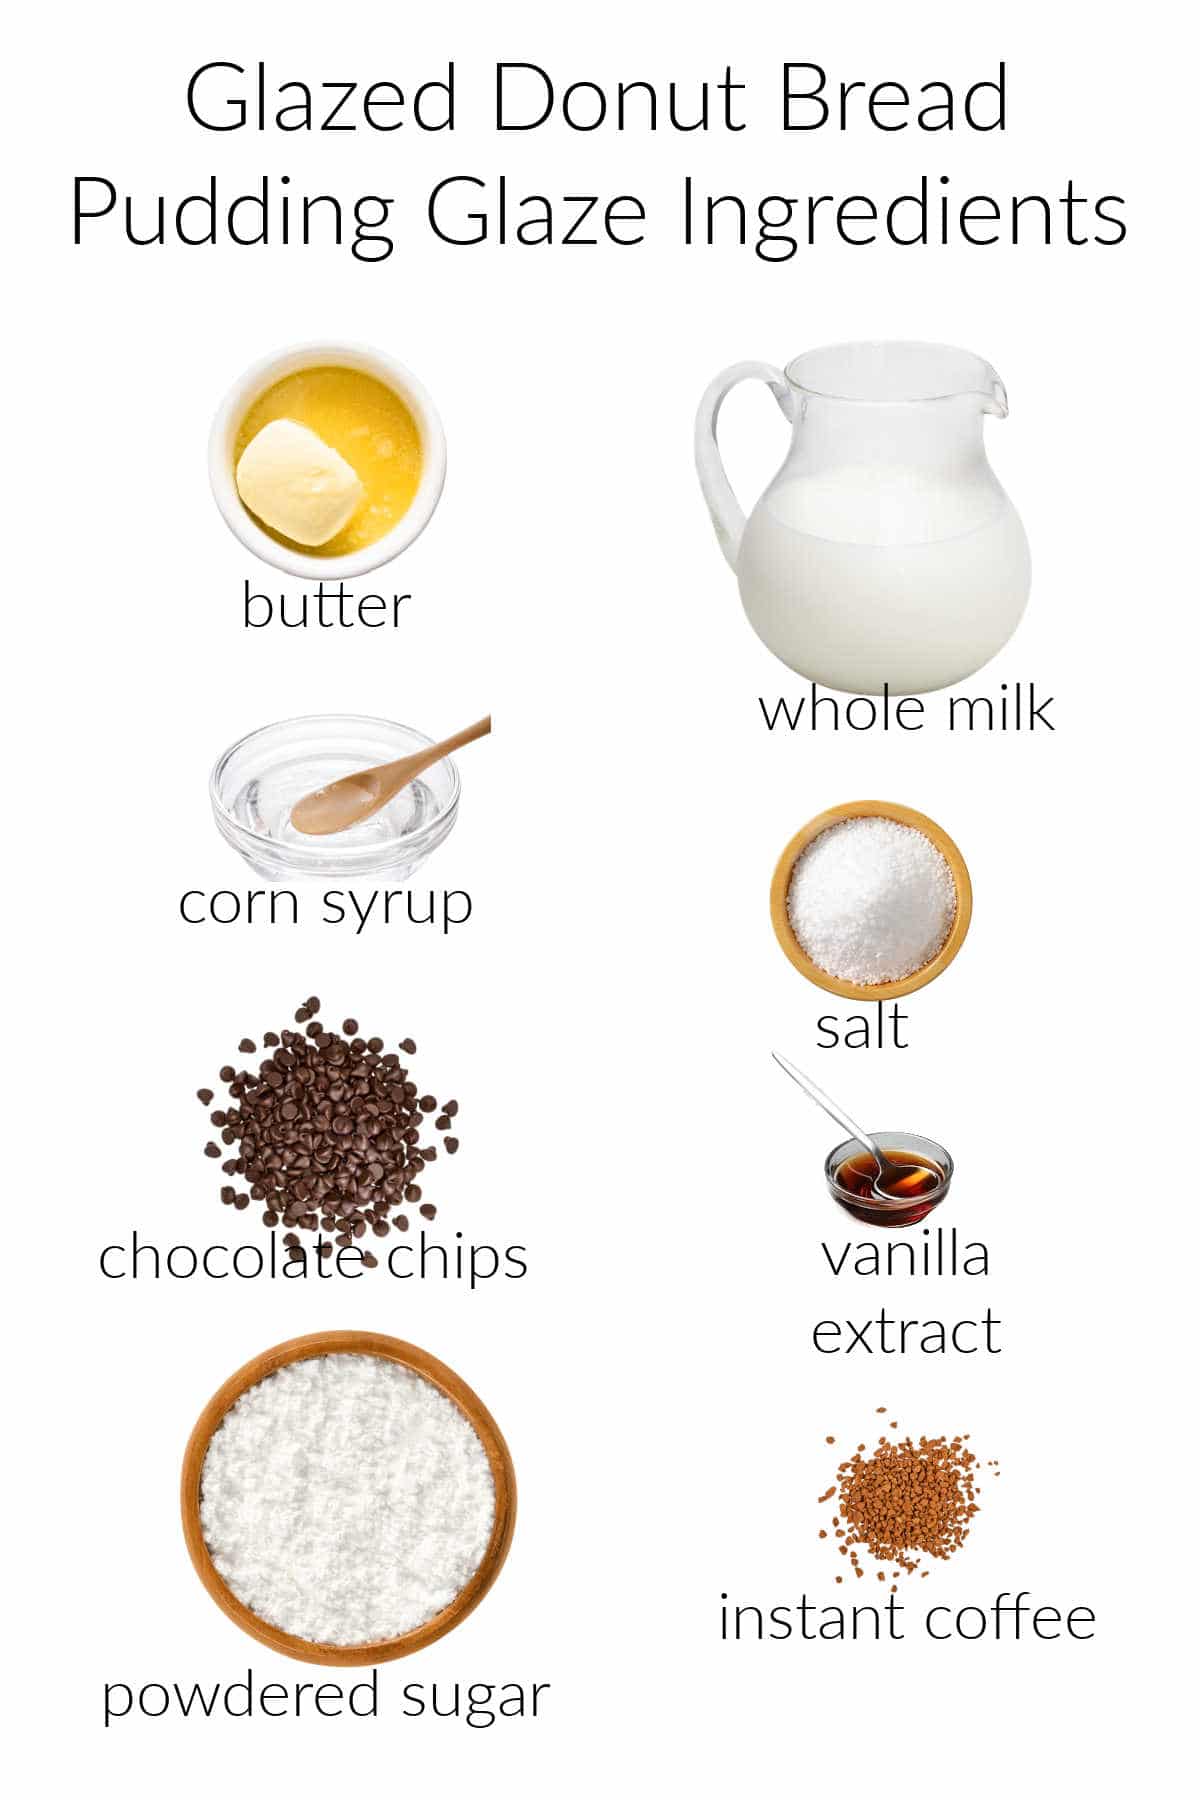 A collage of ingredients for the chocolate glaze: Butter in a white ramekin, whole milk in a clear pitcher, clear corn syrup in a glass bowl with a wooden spoon, salt in a wooden bowl, chocolate chips poured in a pile, vanilla extract in a clear glass bowl with a metal spoon, powdered sugar in a wooden bowl, instant coffee granules poured in a pile.